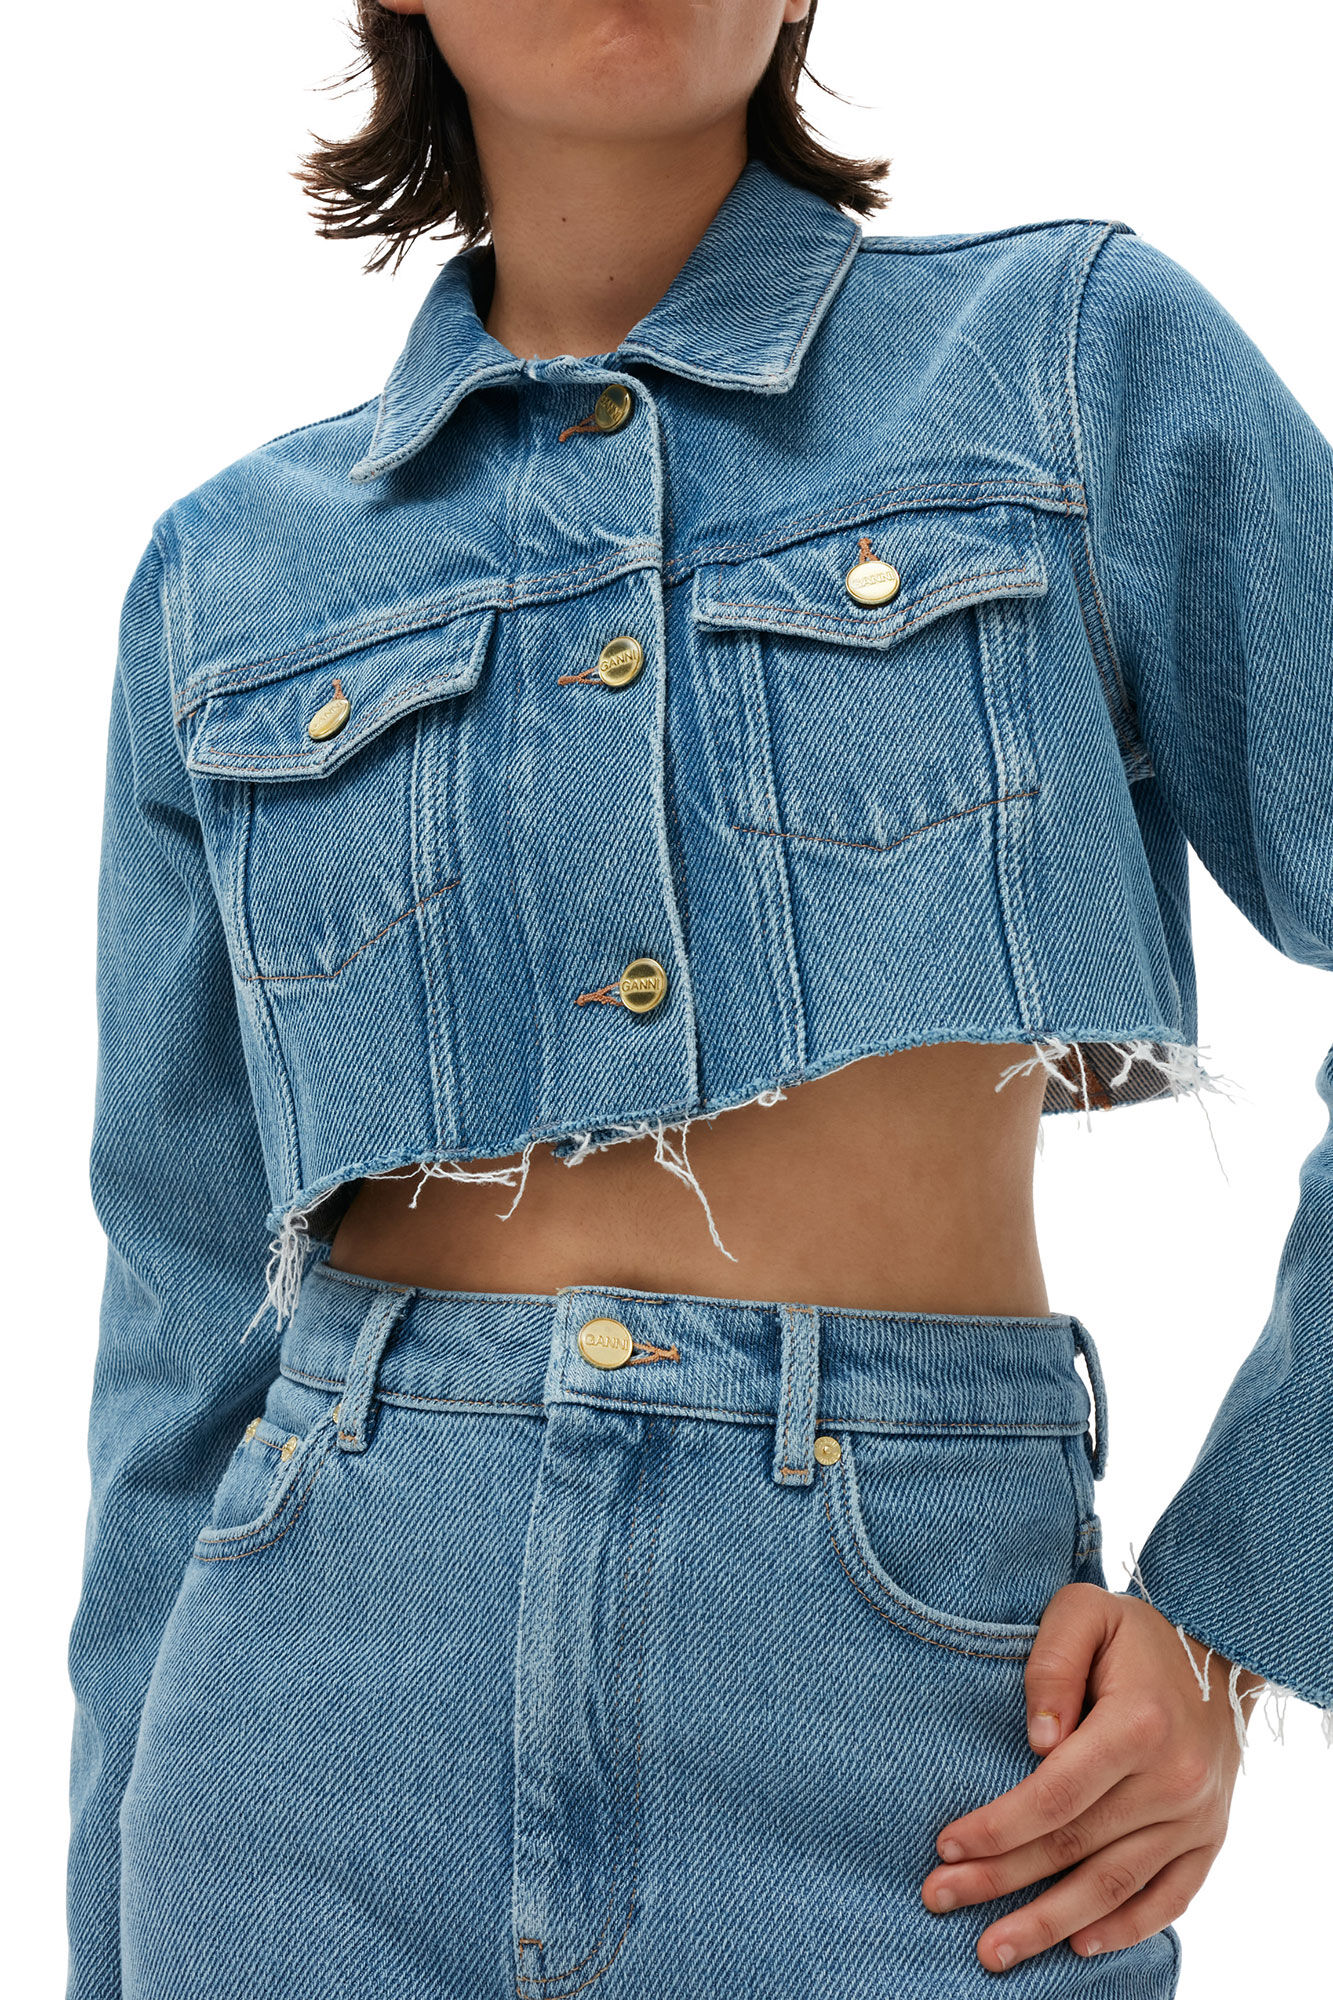 Buy MISS MOLY Women's Cropped Denim Jackets Summer Short Sleeve Classic  Casual Jean Jackets, Blue, Medium at Amazon.in